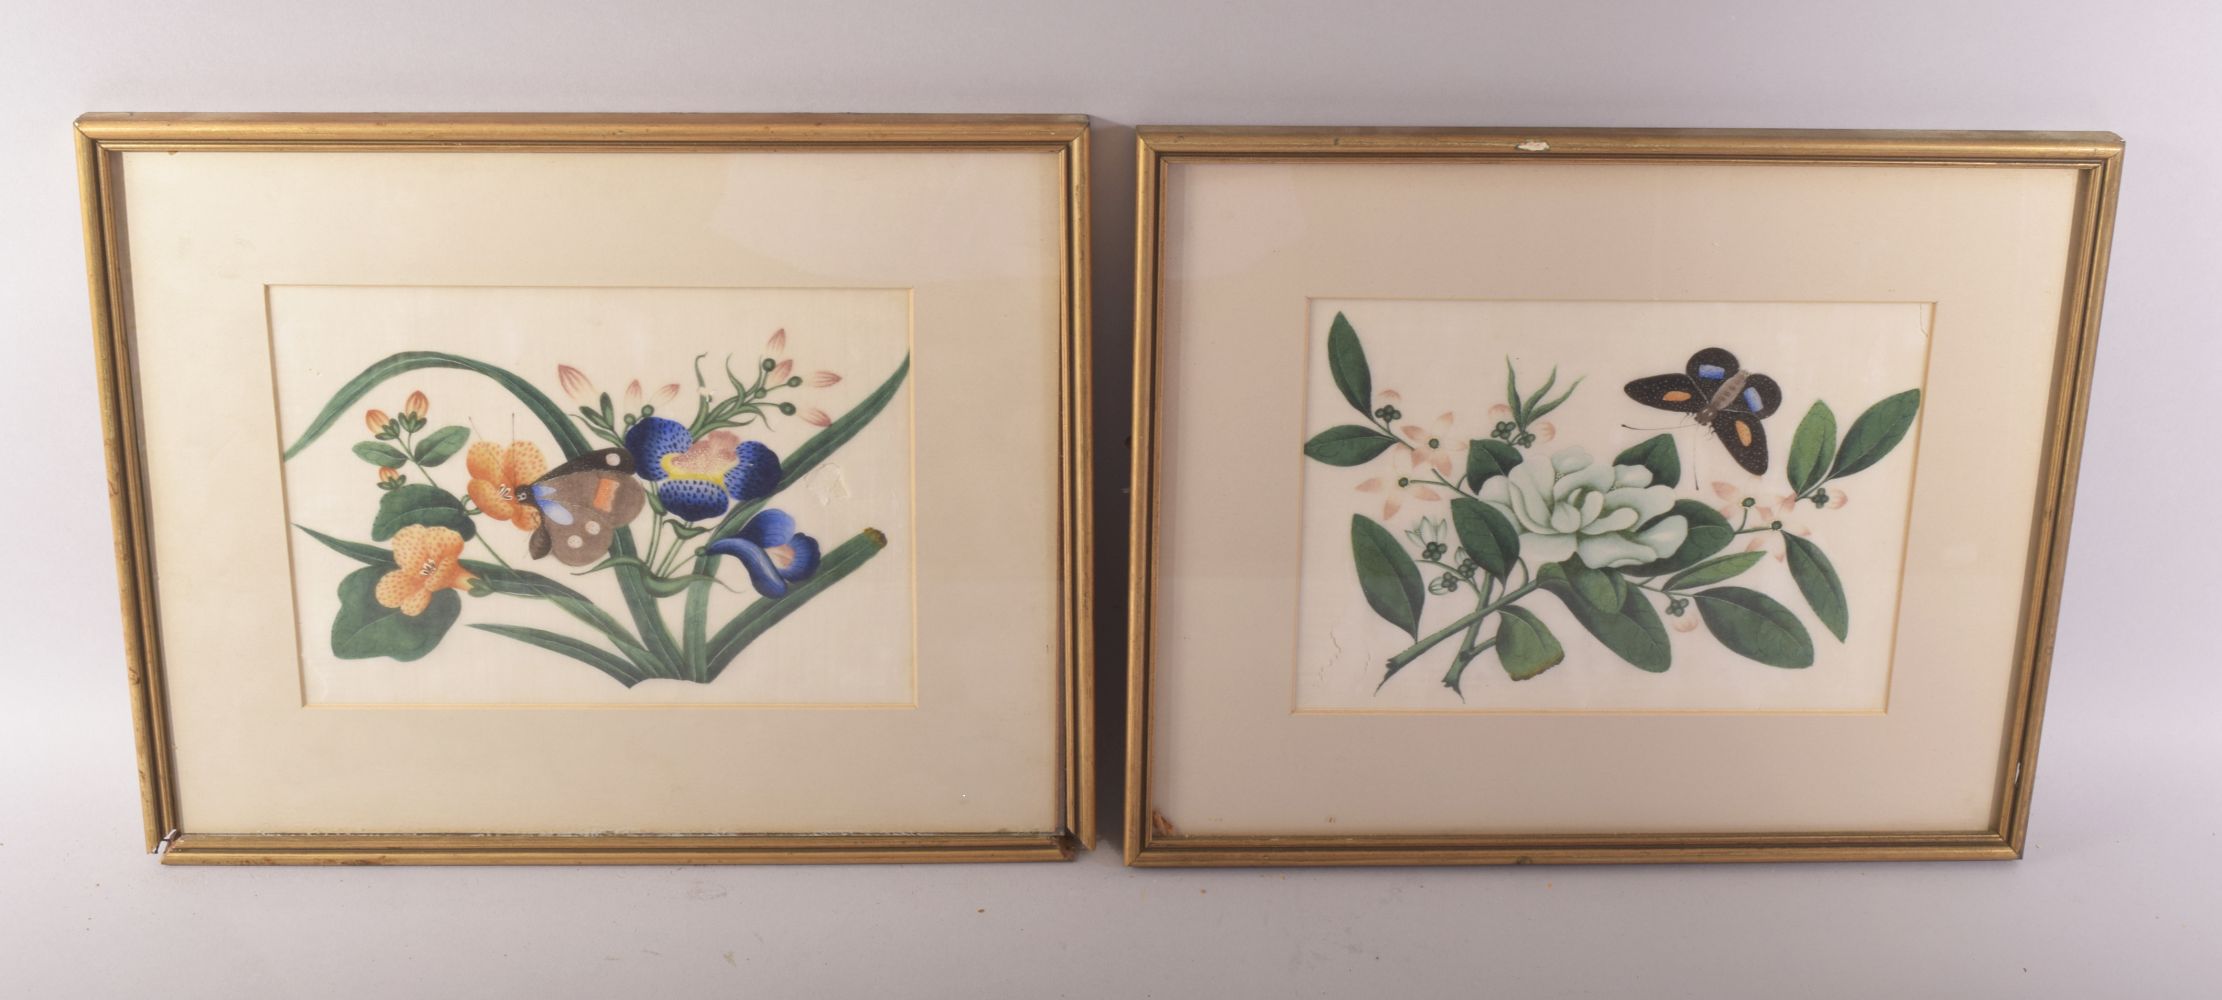 A PAIR OF FRAMED AND GLAZED CHINESE PITH PAINTINGS OF BUTTERFLIES amongst native flora, both